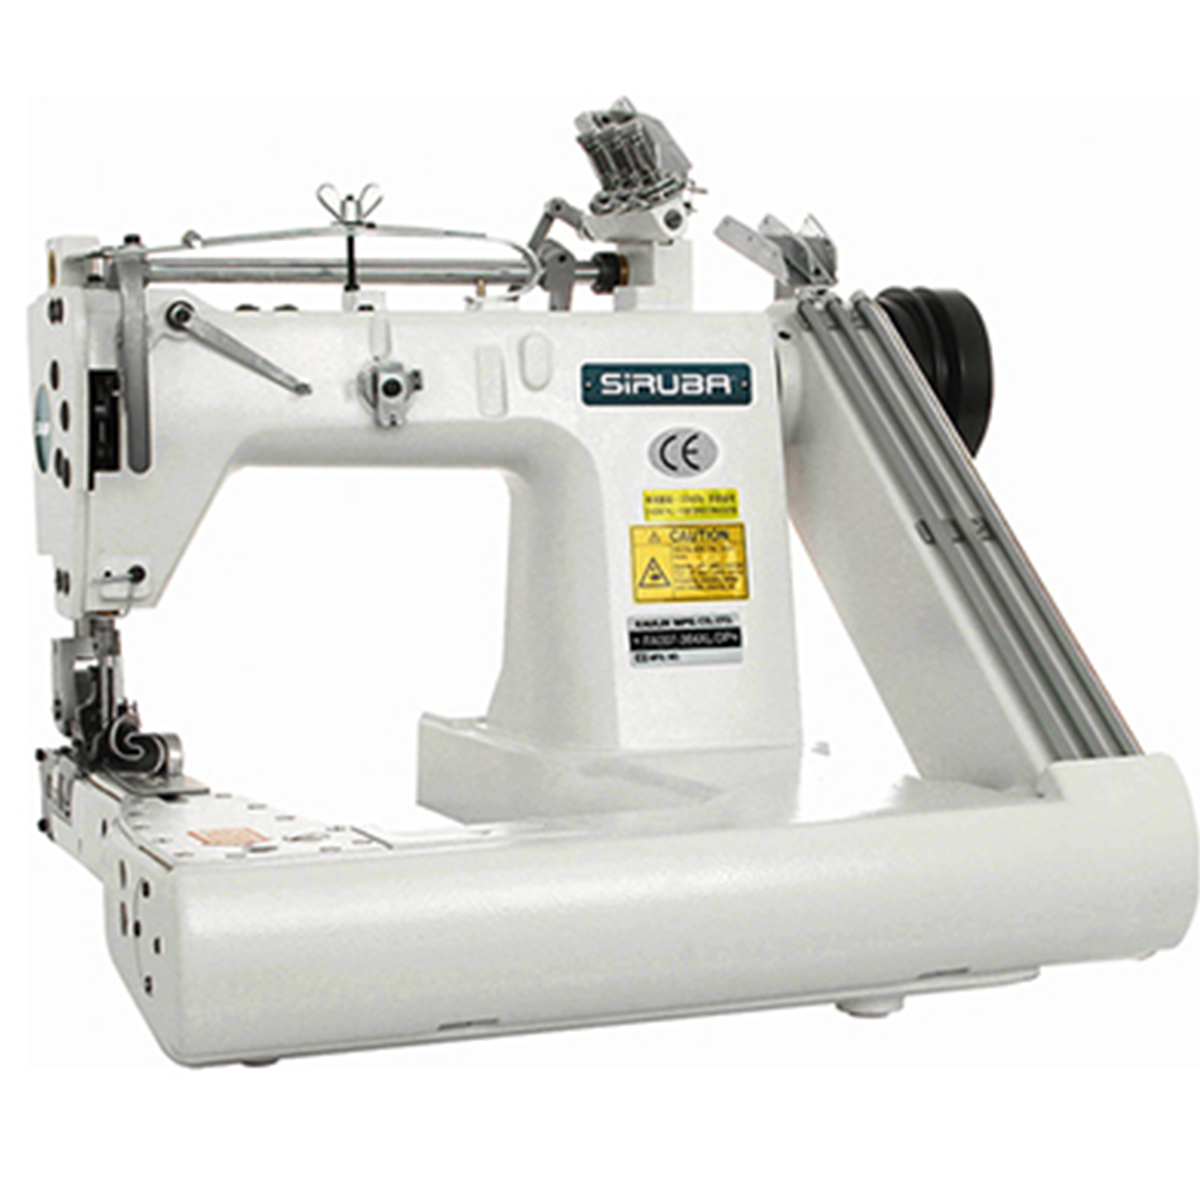 SIRUBA FA007-264 2 Needle Feed of the Arm Chainstitch For Shirts Industrial Sewing Machine Assembled with Servo Motor, Table and Stand Included